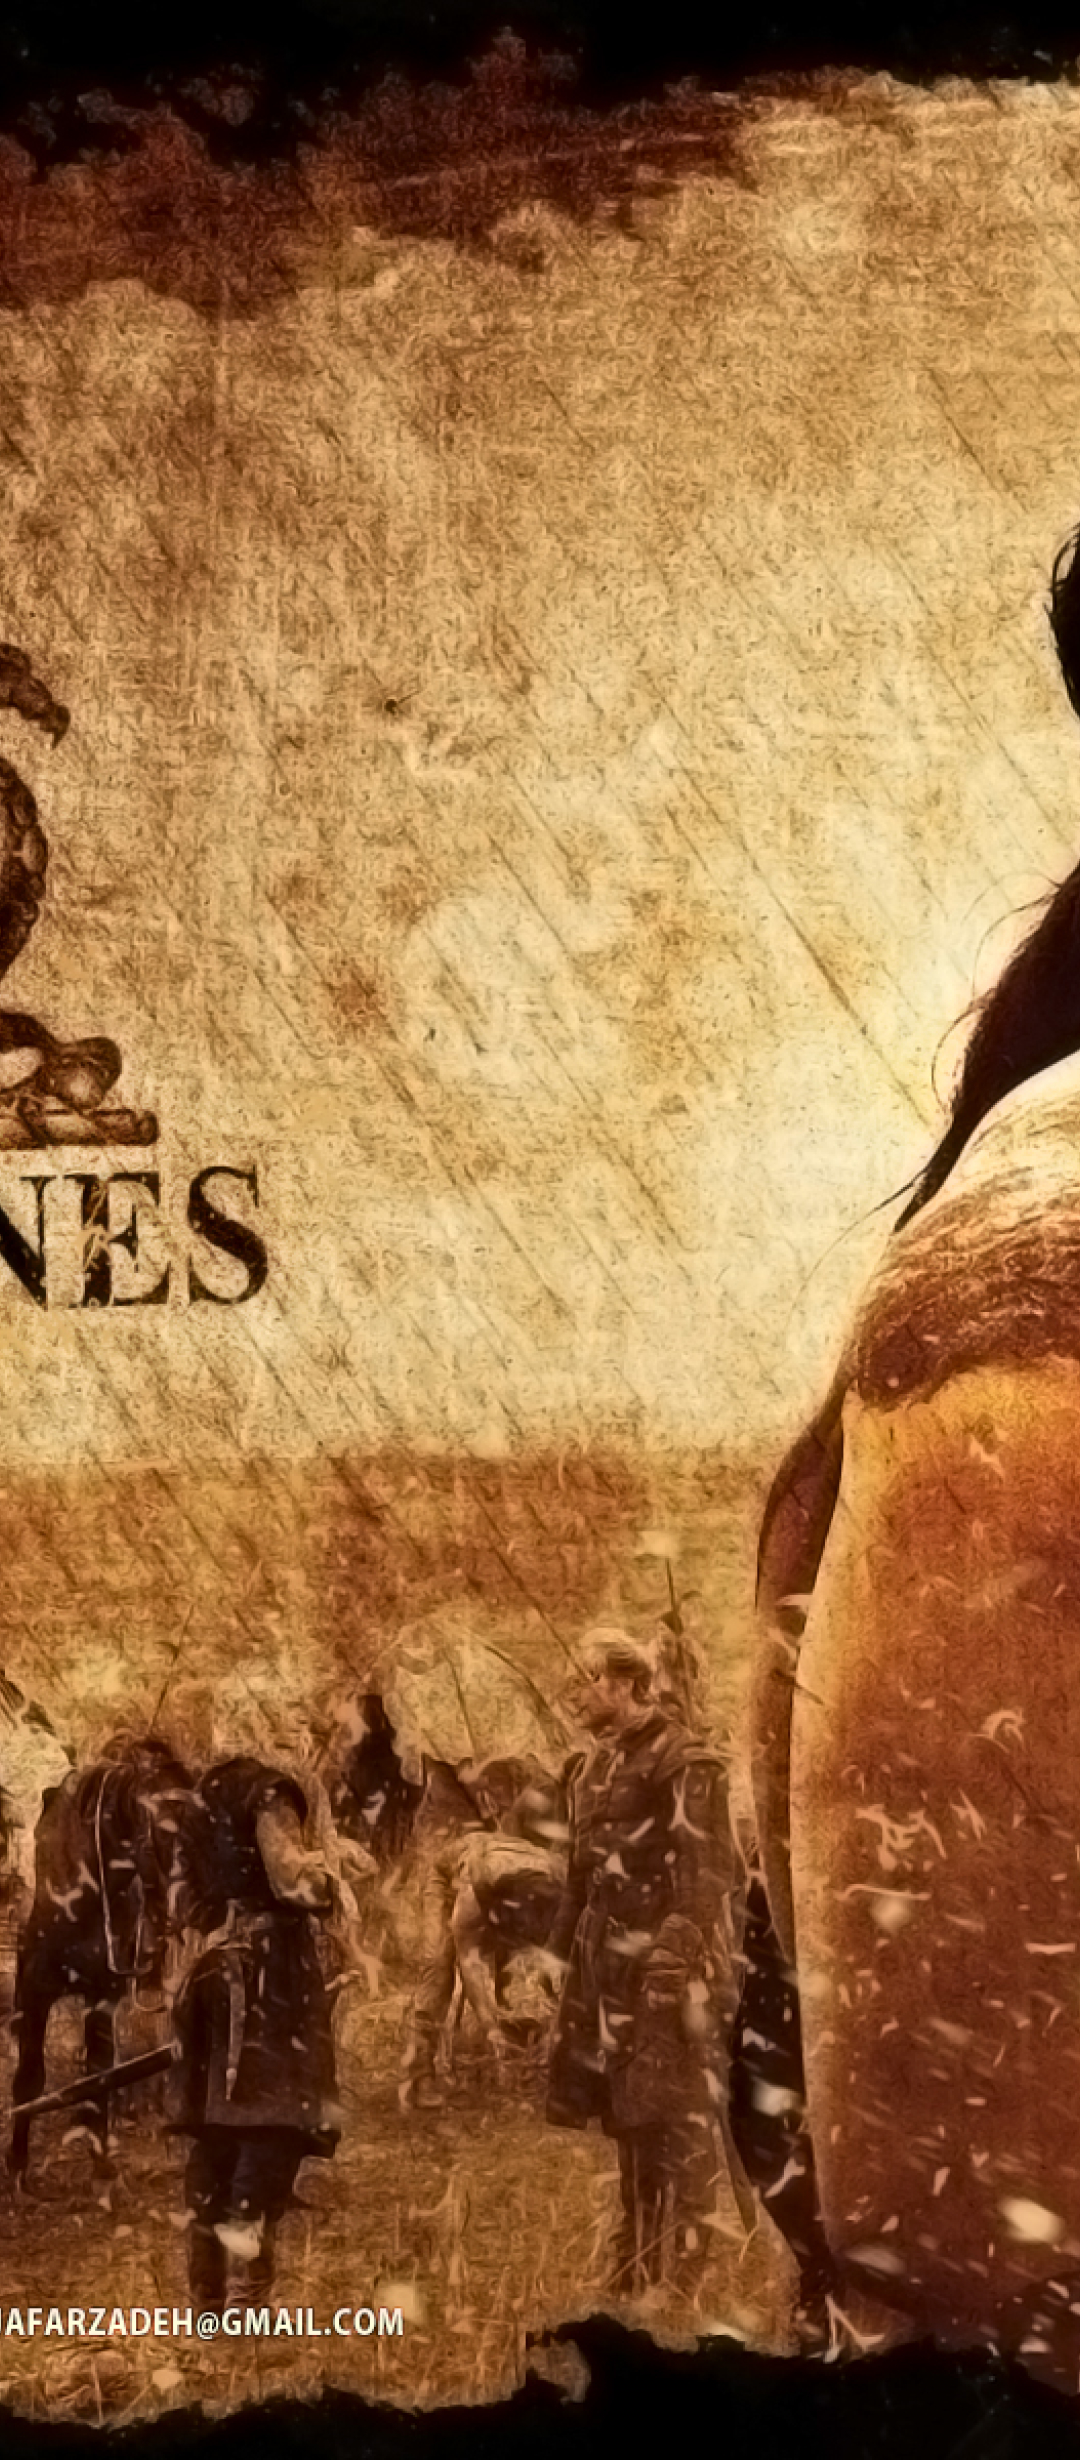 1080x2460 Game Of Thrones Tv Series Wallpapers Hd 1080x2460